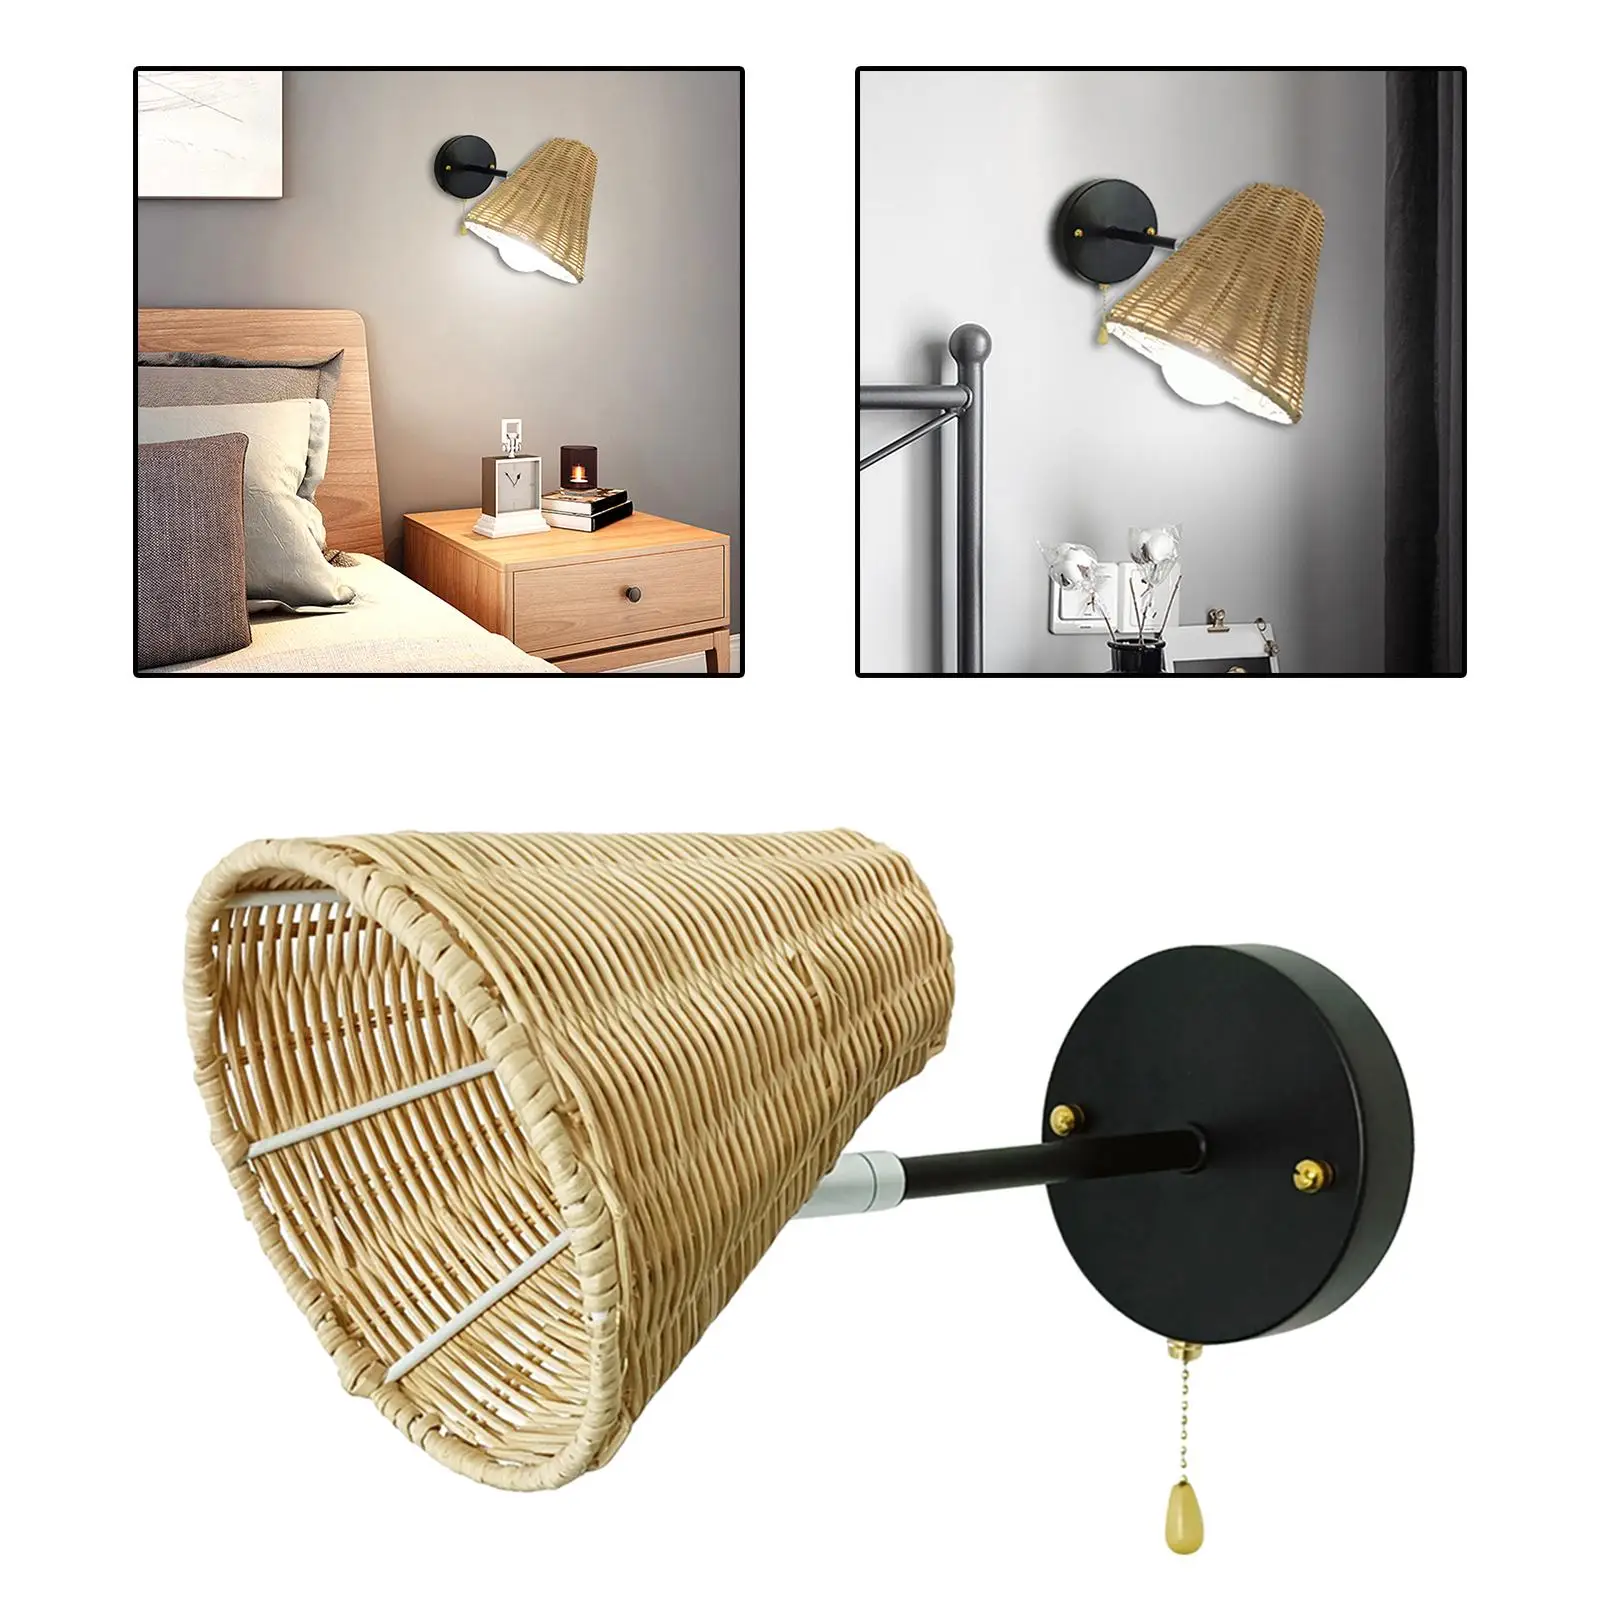 Rattan Wall Lamp Sconce Light W/ Pull Cord Switch Adjustable Home Bedroom